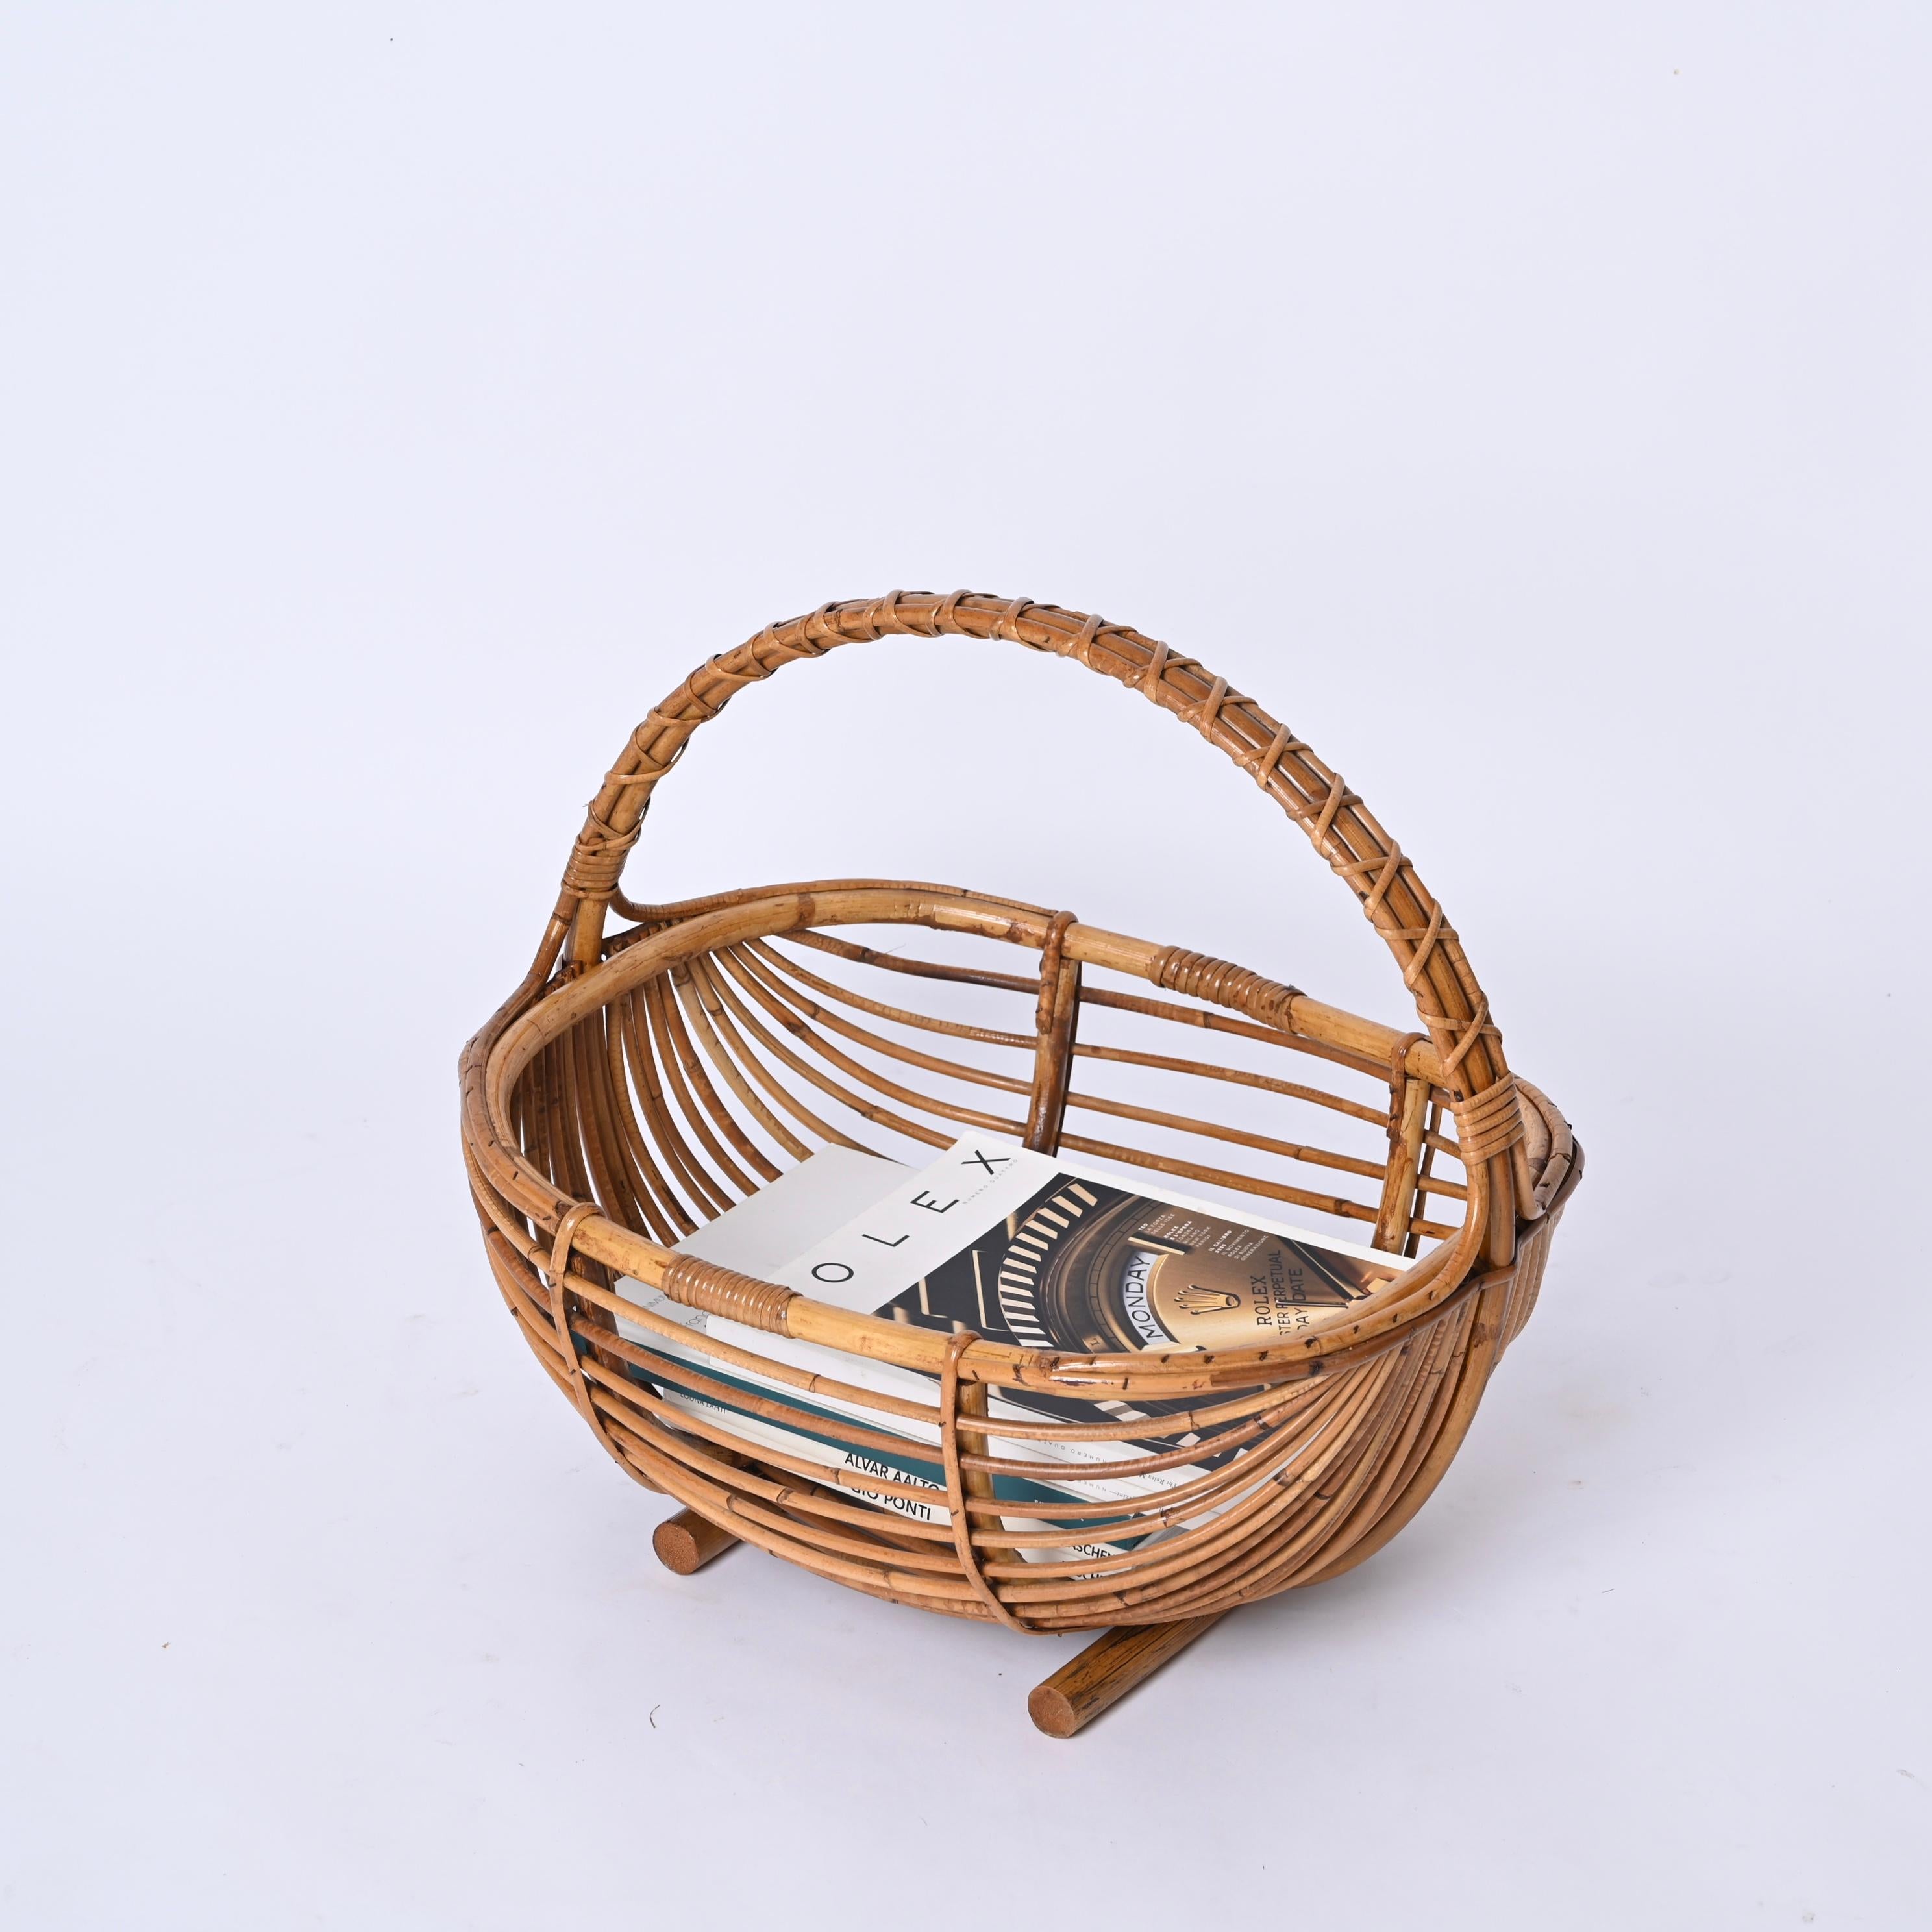 Italian Midcentury French Riviera Magazine Rack in Bamboo and Rattan, Italy 1970s For Sale